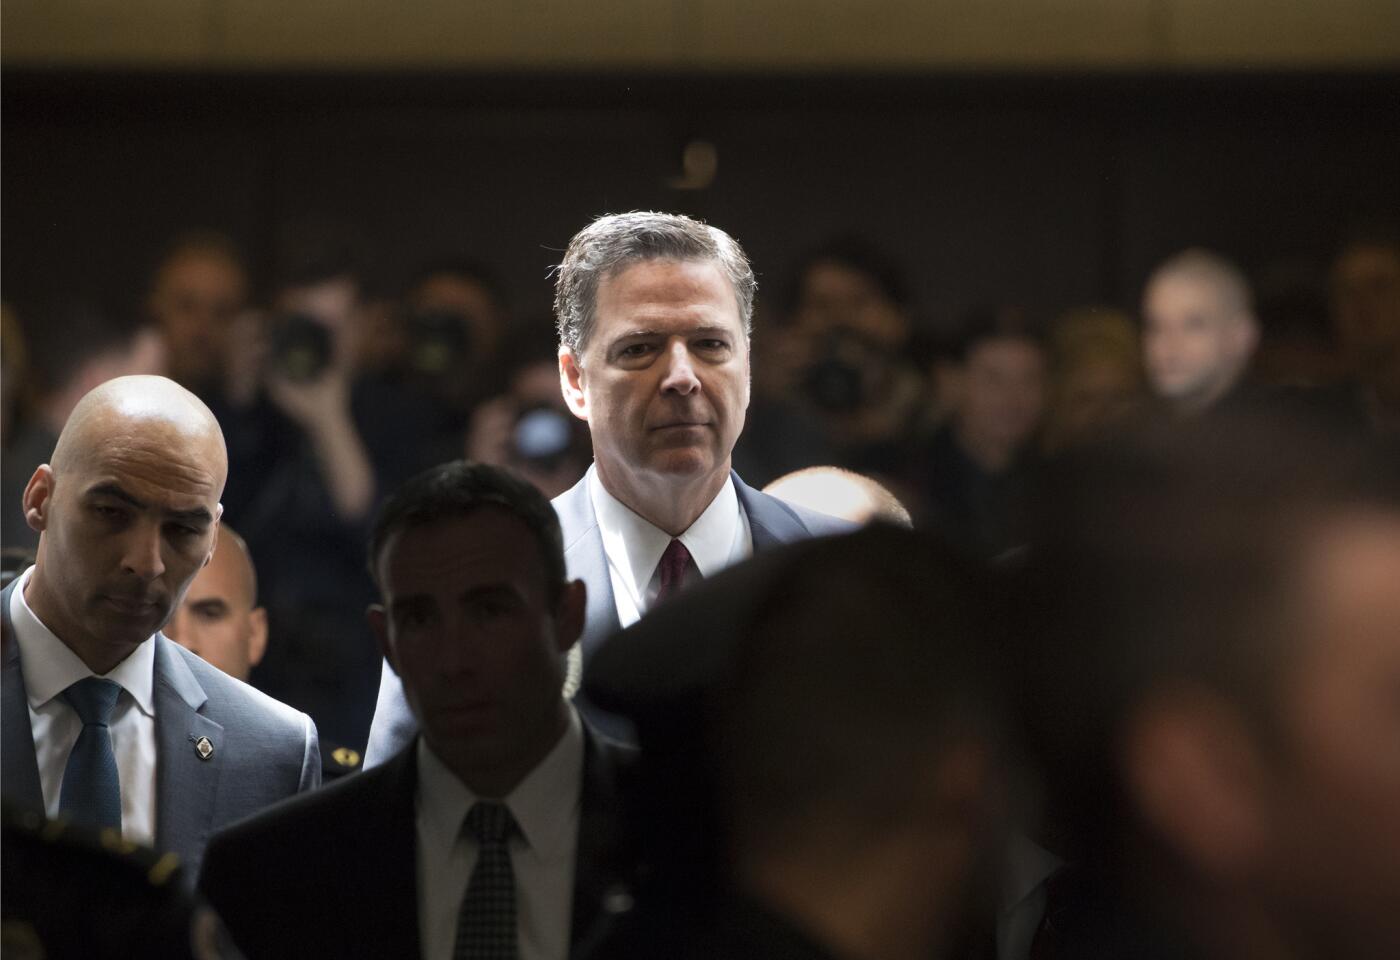 Former FBI director James Comey heads to a secure room to continue his testimony to the Senate Select Committee on Intelligence, on Capitol Hill in Washington.